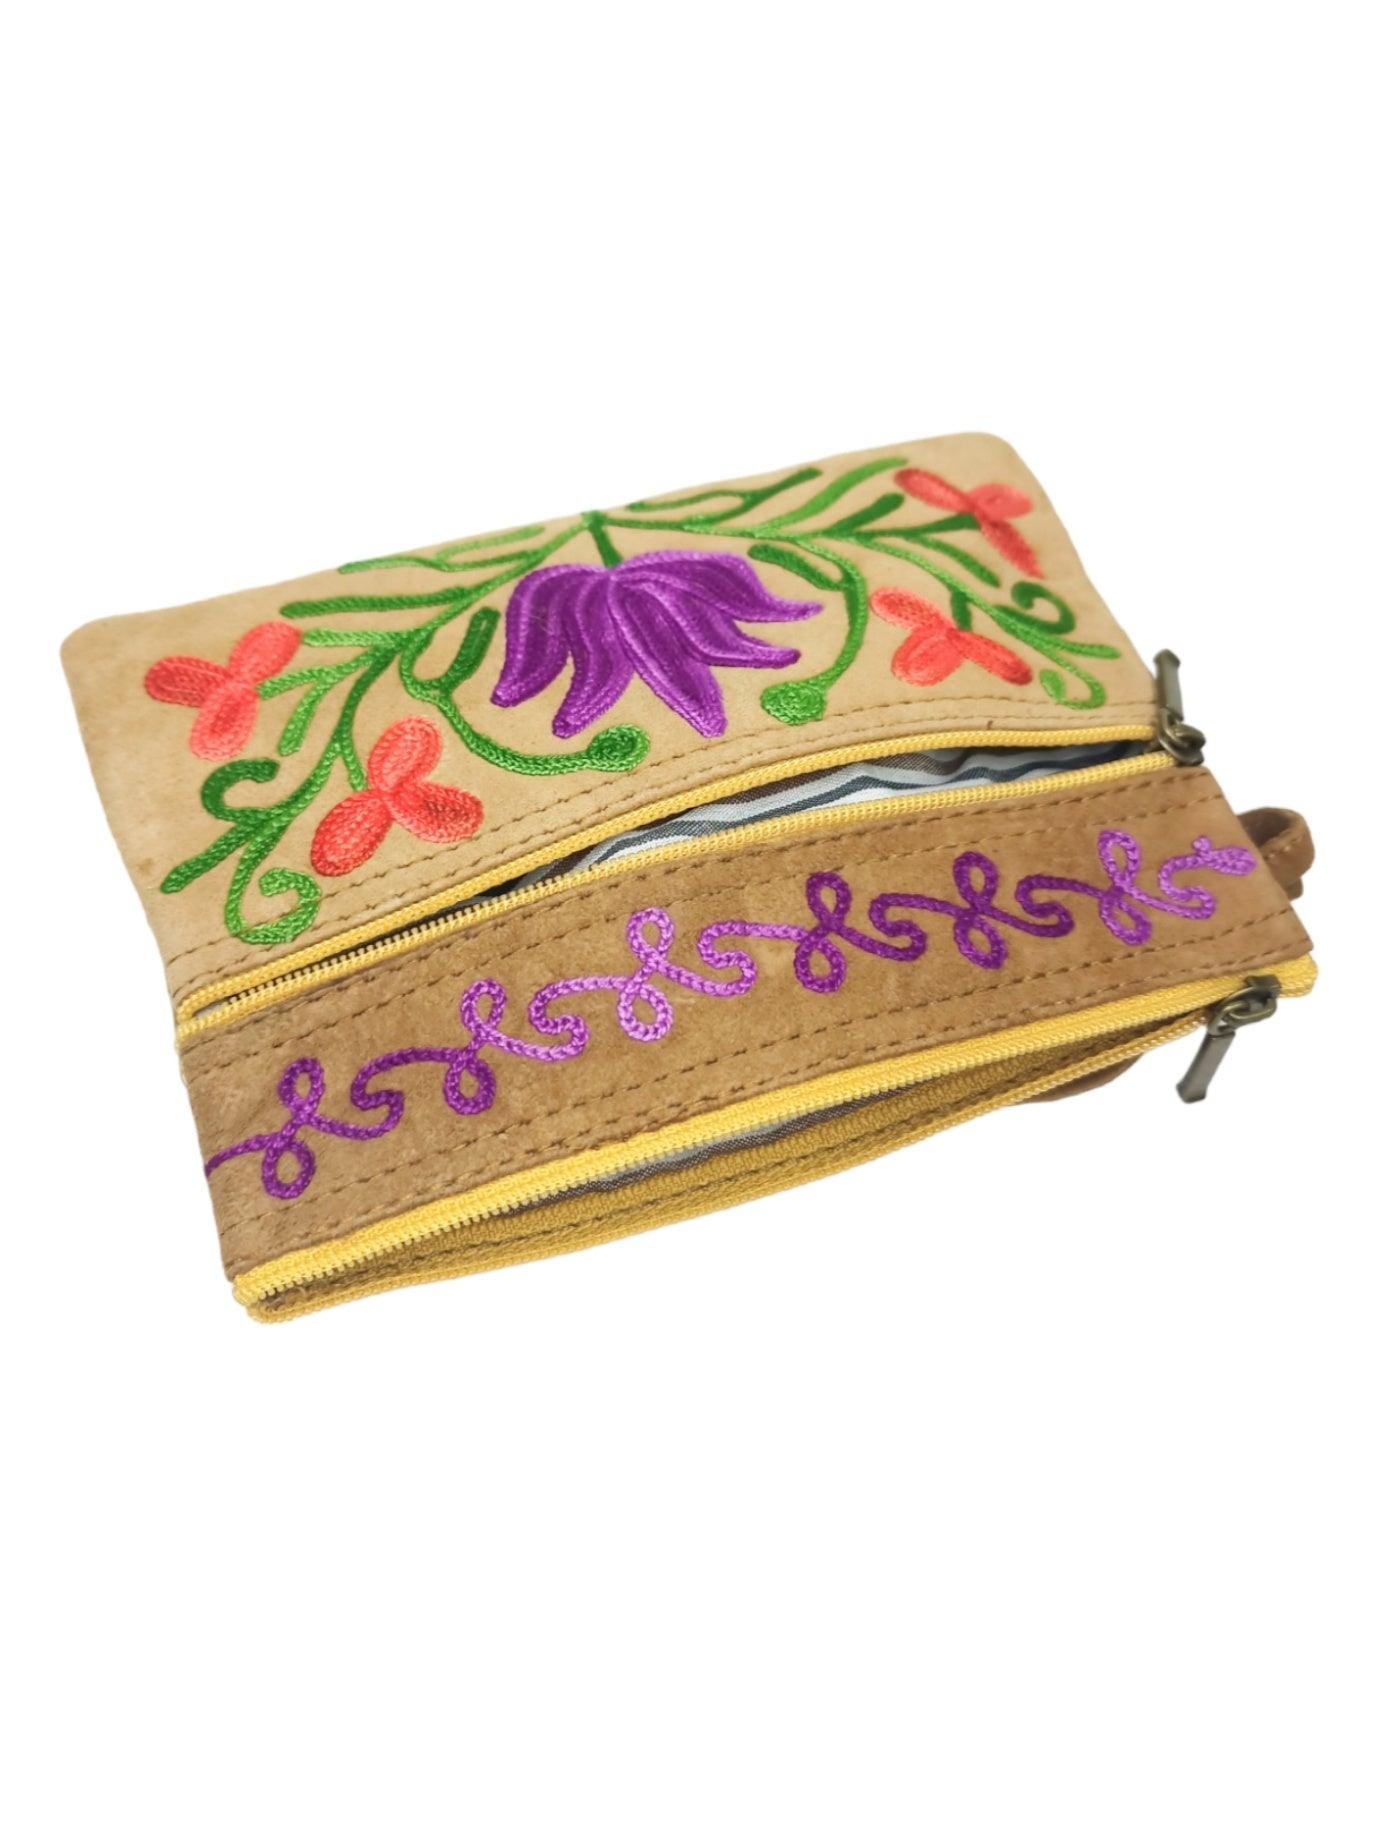 Moroccan Leather Wallet Purse Bag Handbag Antique Embroidered Traditional  Women | eBay